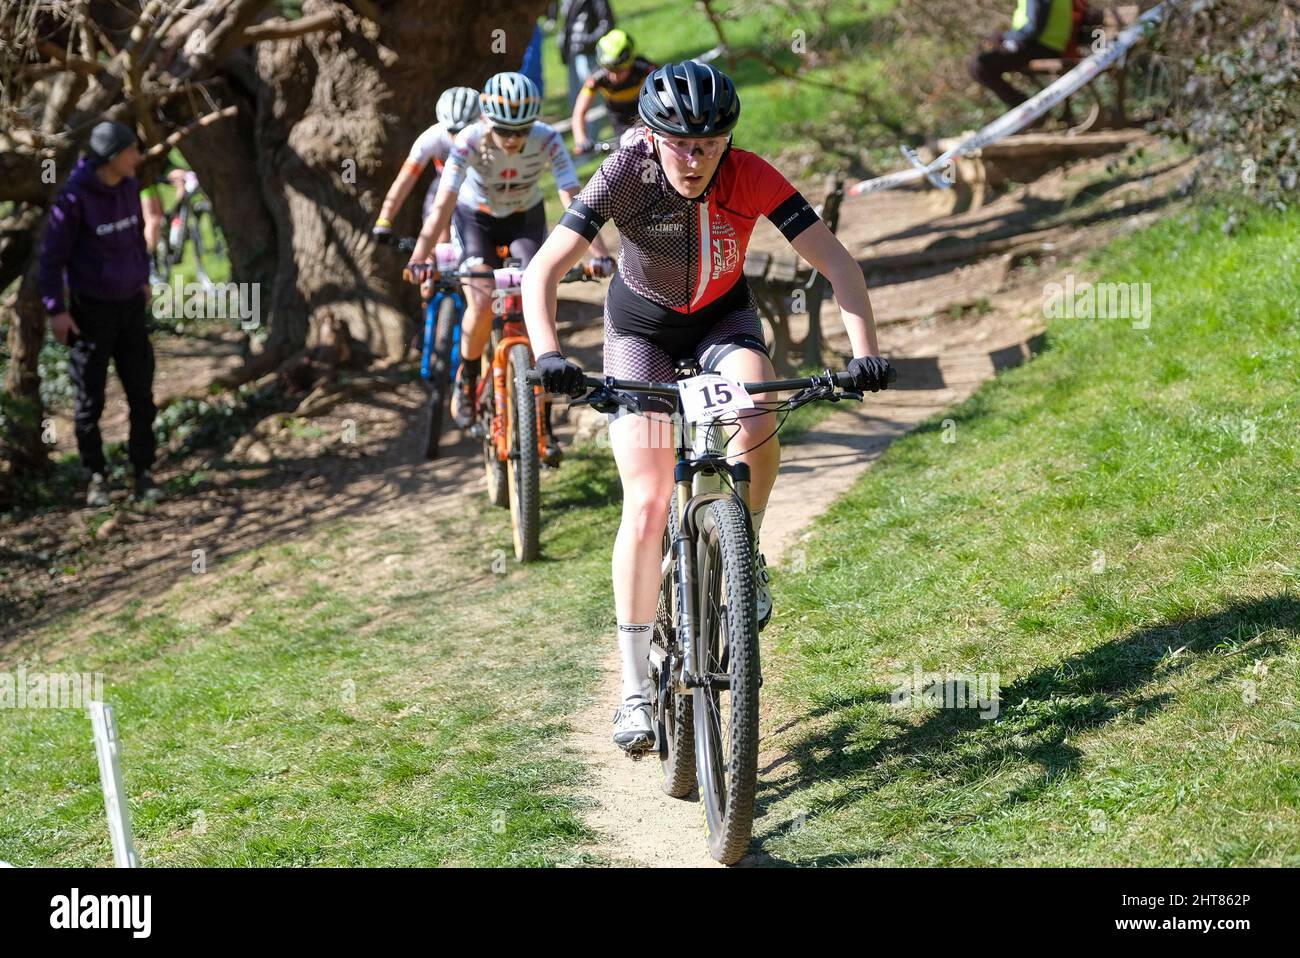 15) - Nina Mosser (AUT) during the MTB - Mountain Bike Verona MTB  International XCO 2022 - Open woman race on February 27, 2022 at the Parco  delle Colombare in Verona, Italy (